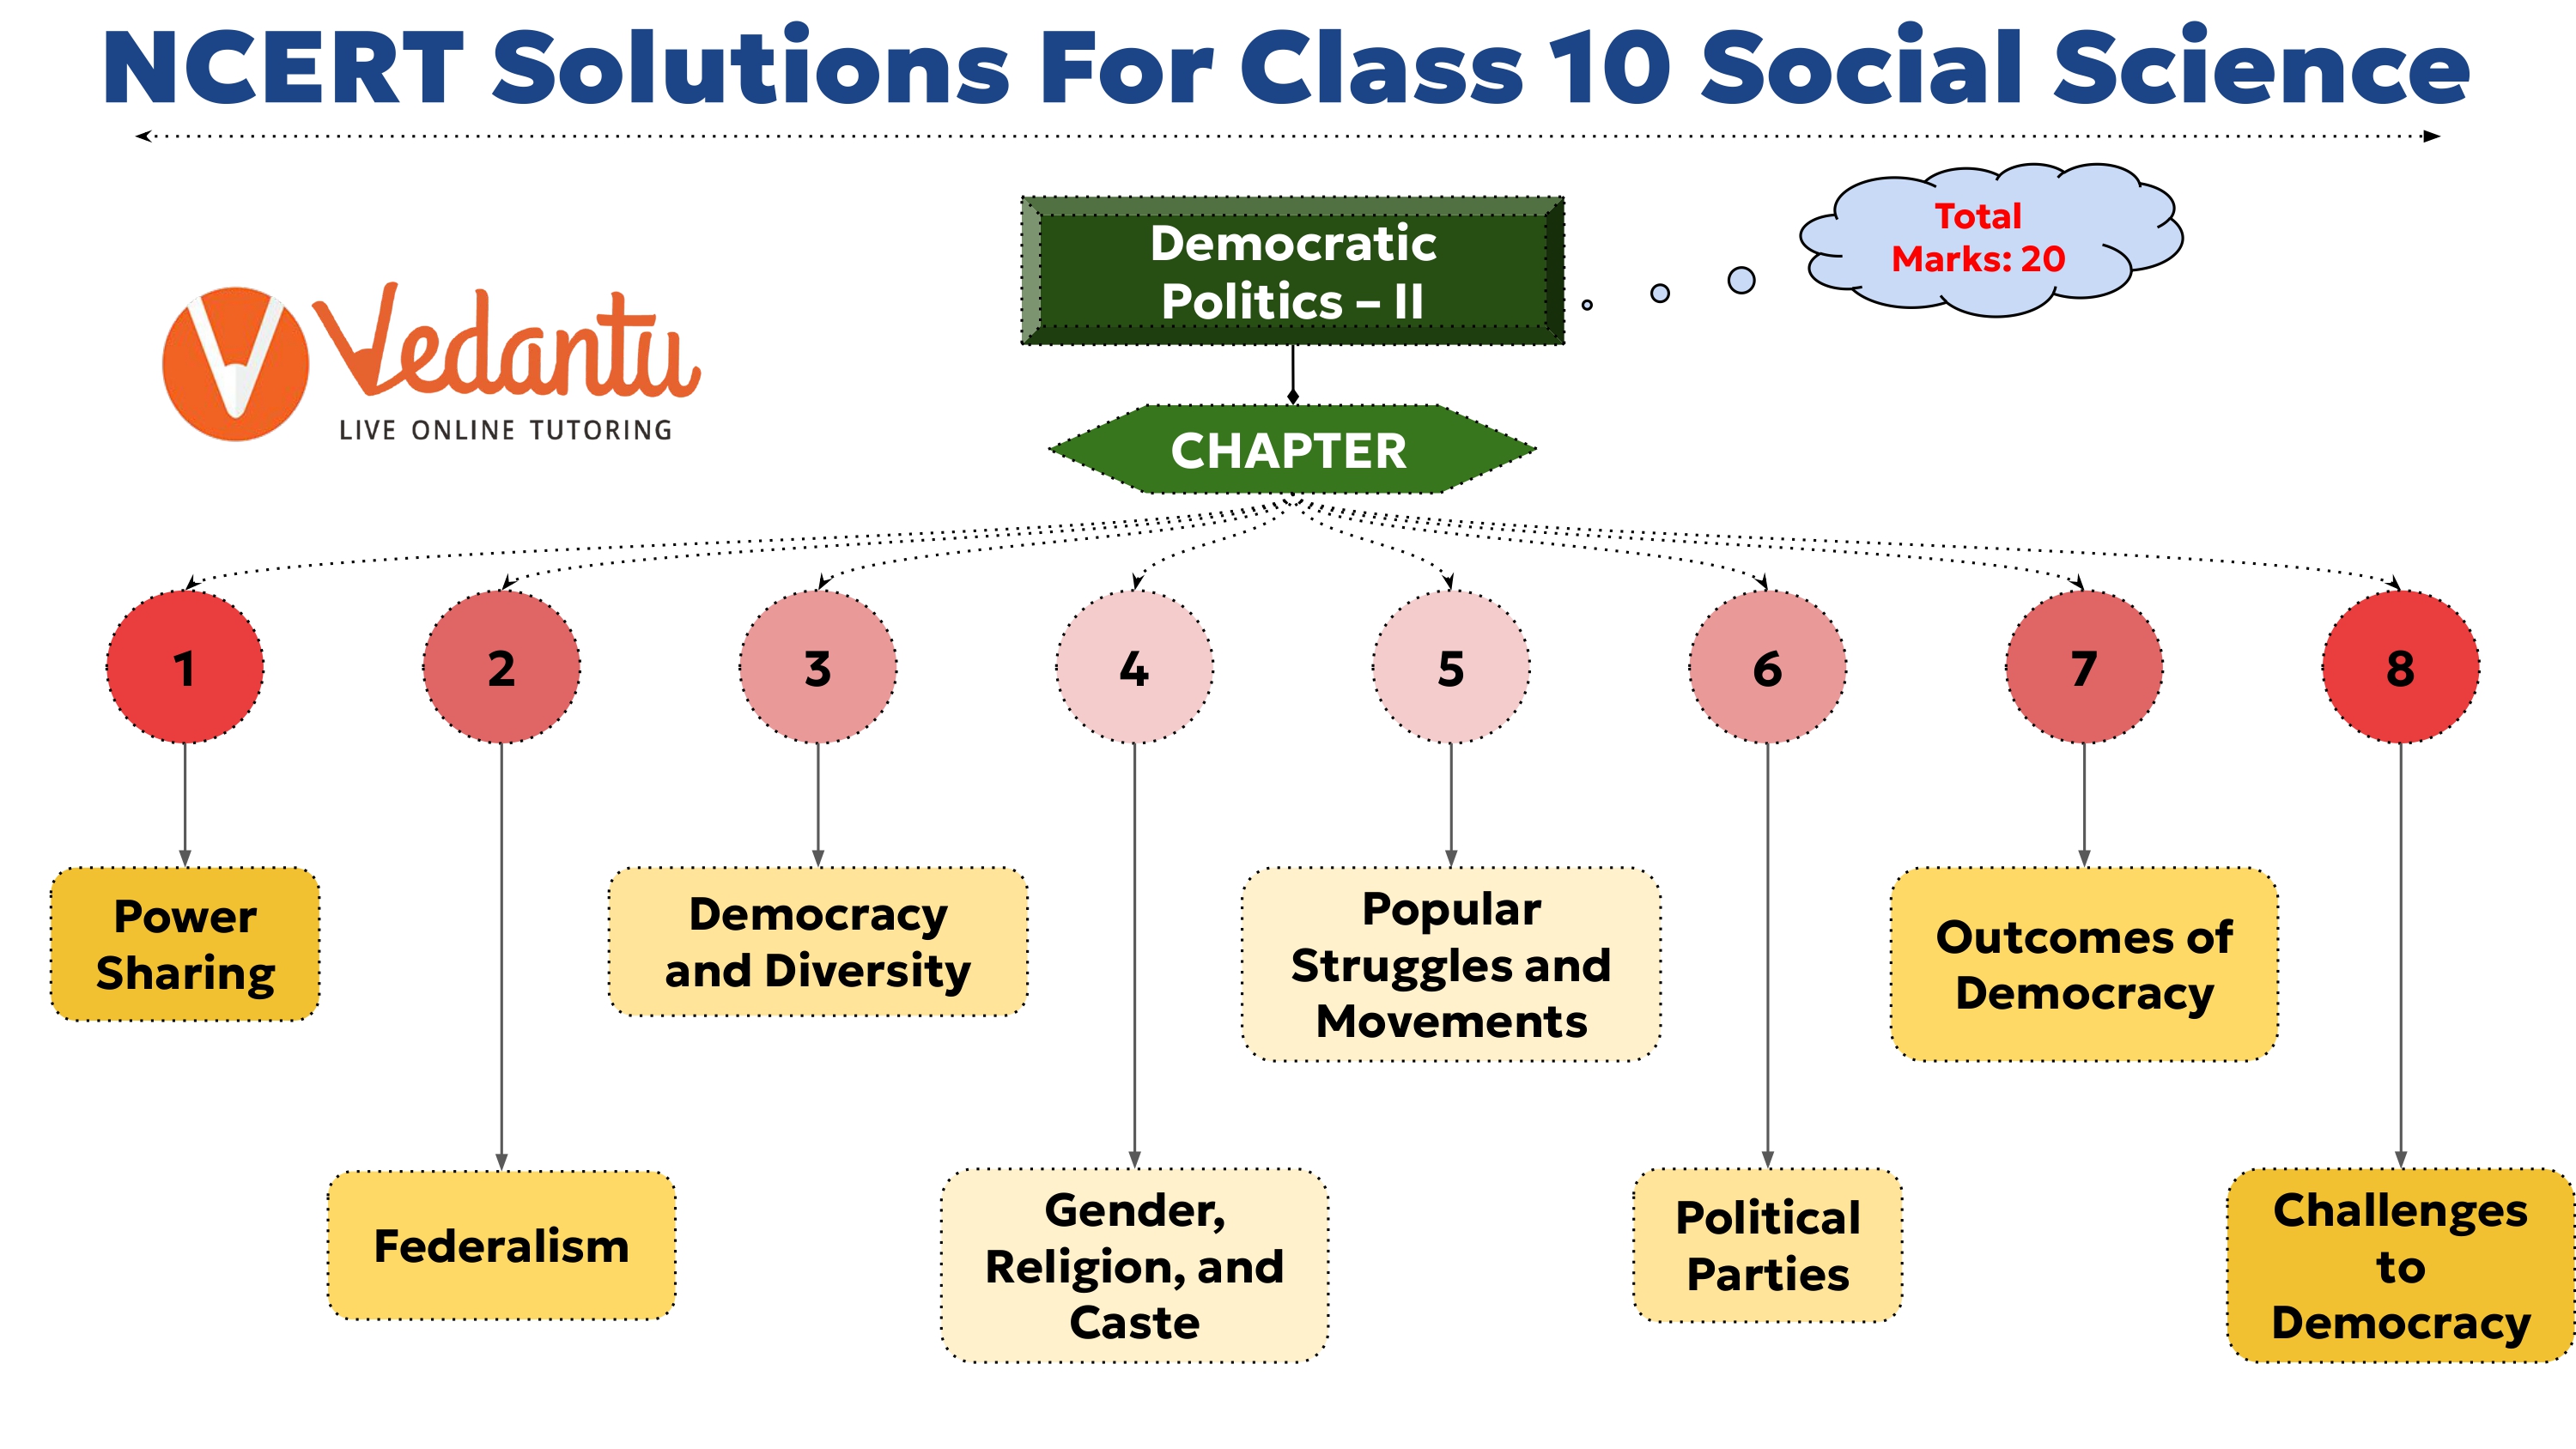 NCERT Solutions for Class 10 Social Science Democratic Politics overview of chapters